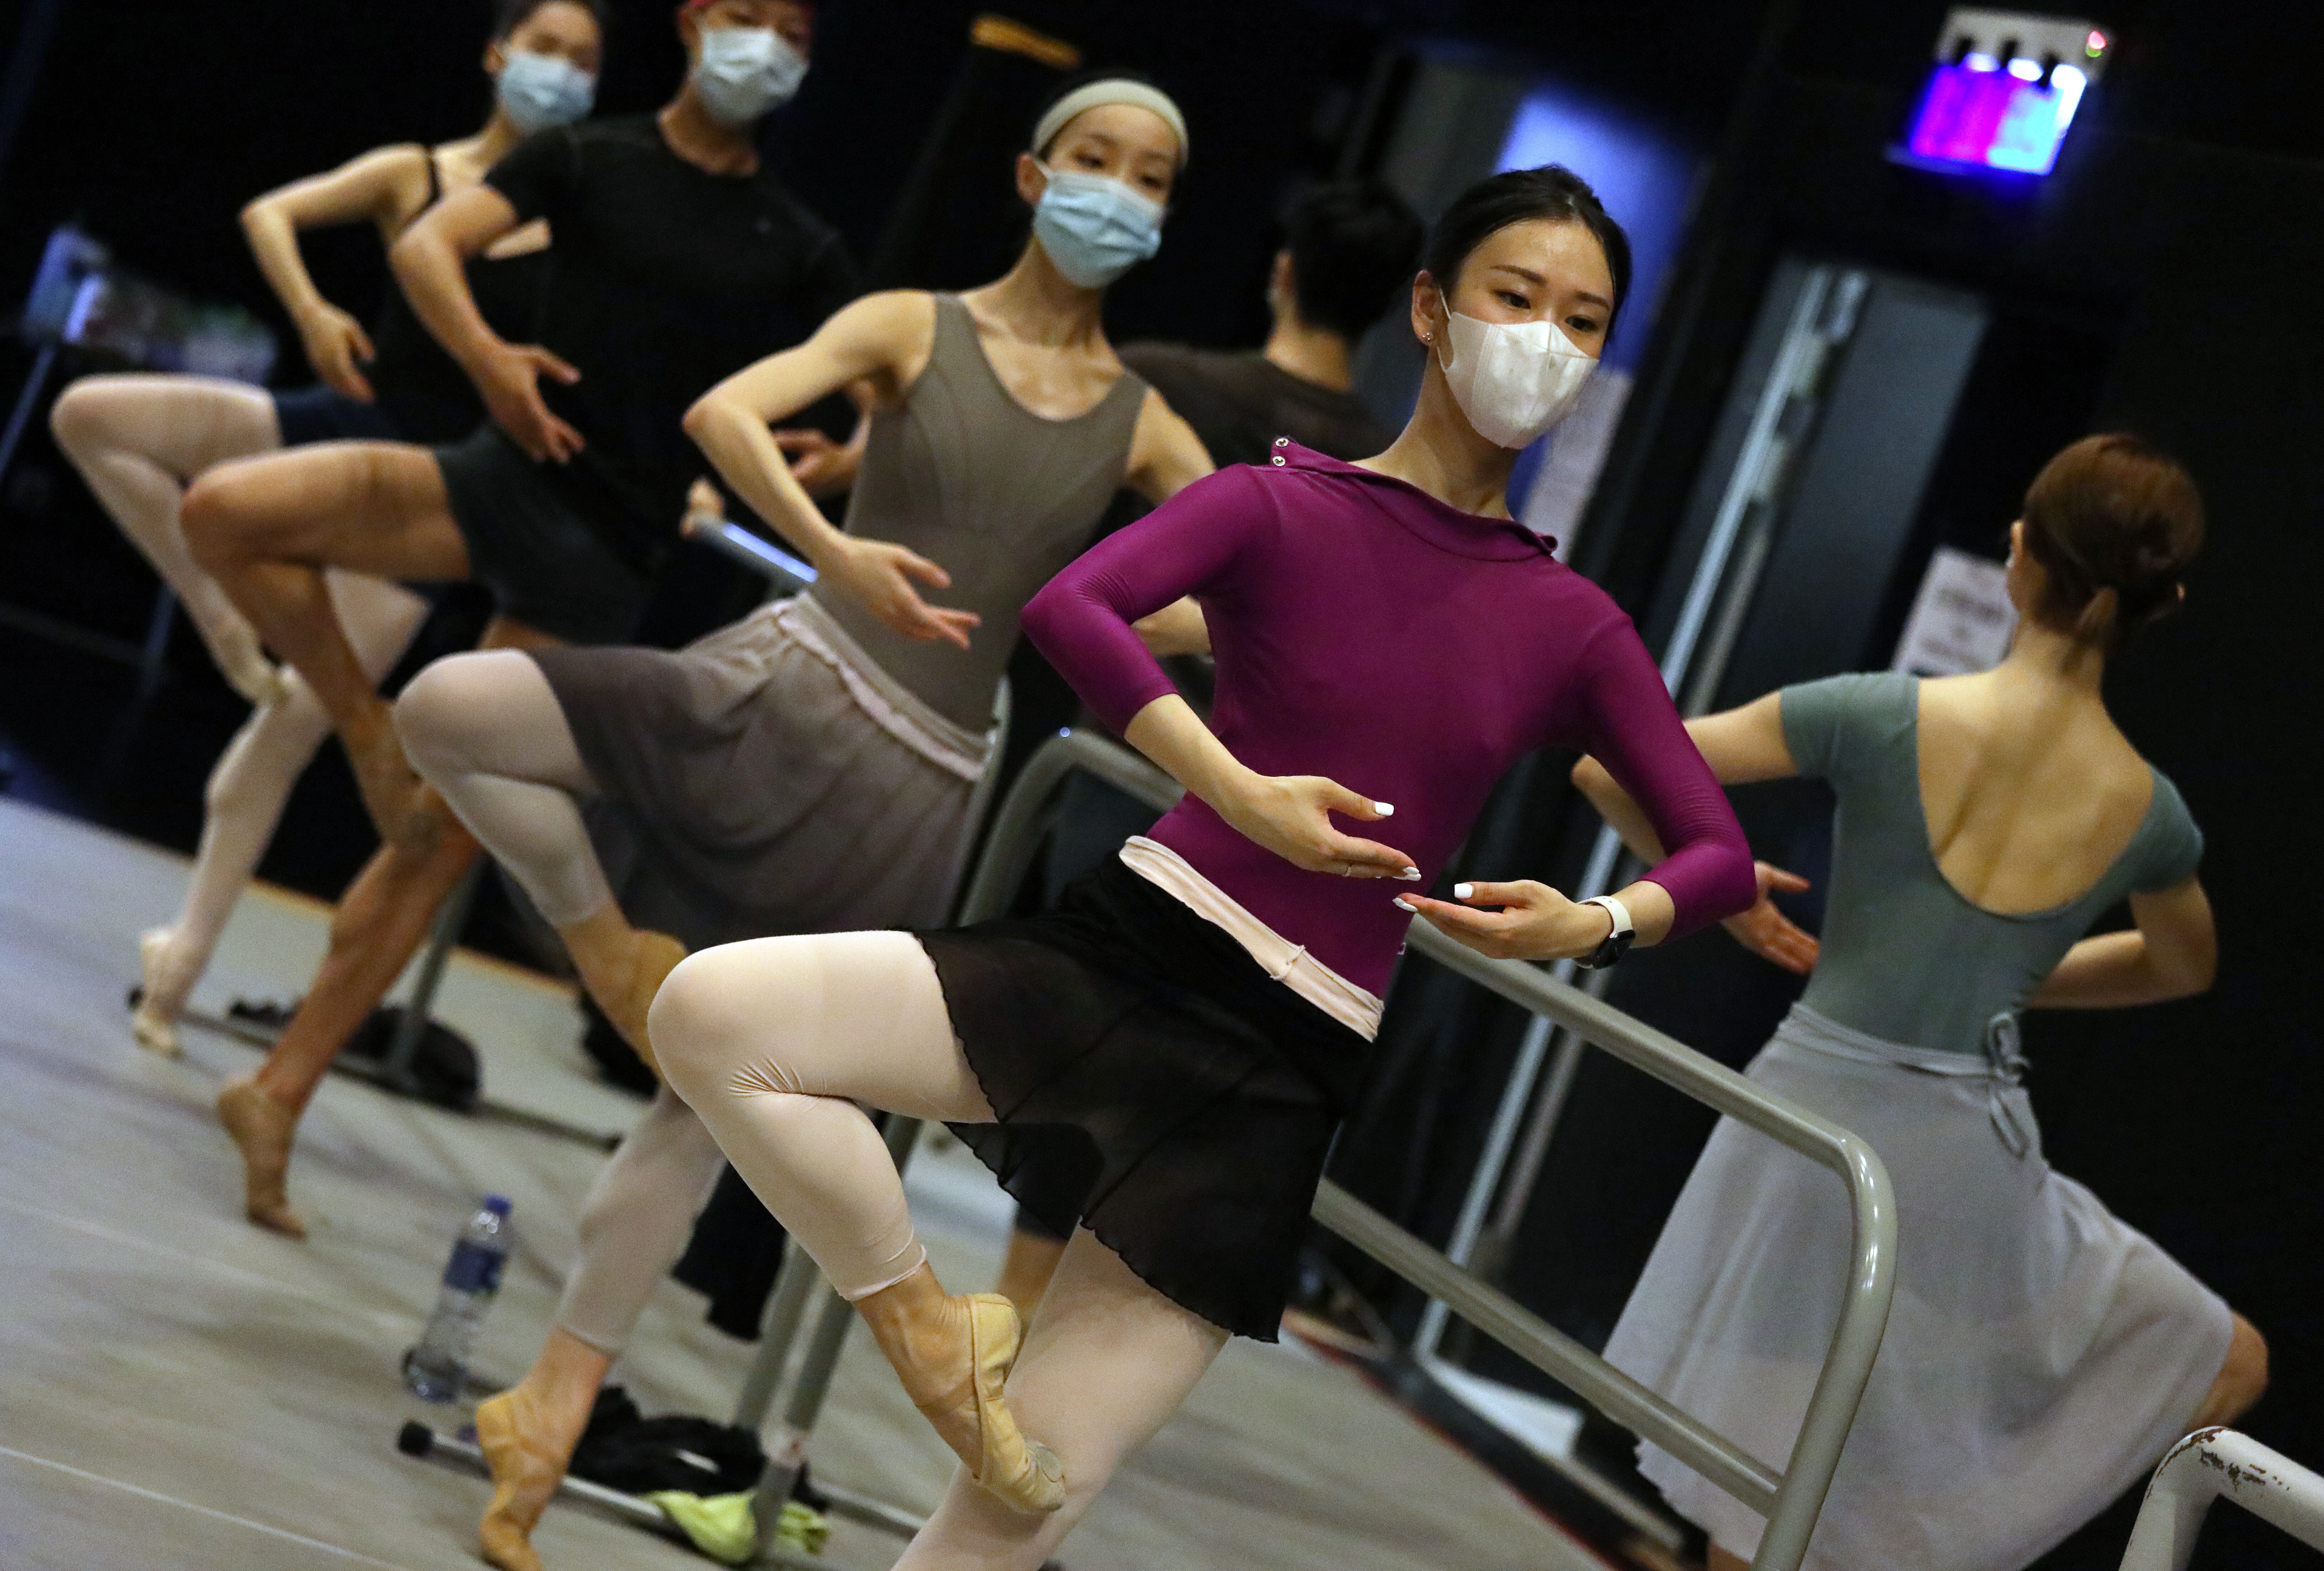 Hong Kong Ballet dancers practise in a studio at the Hong Kong Institute of Contemporary Culture during the coronavirus pandemic. Photo: Nora Tam